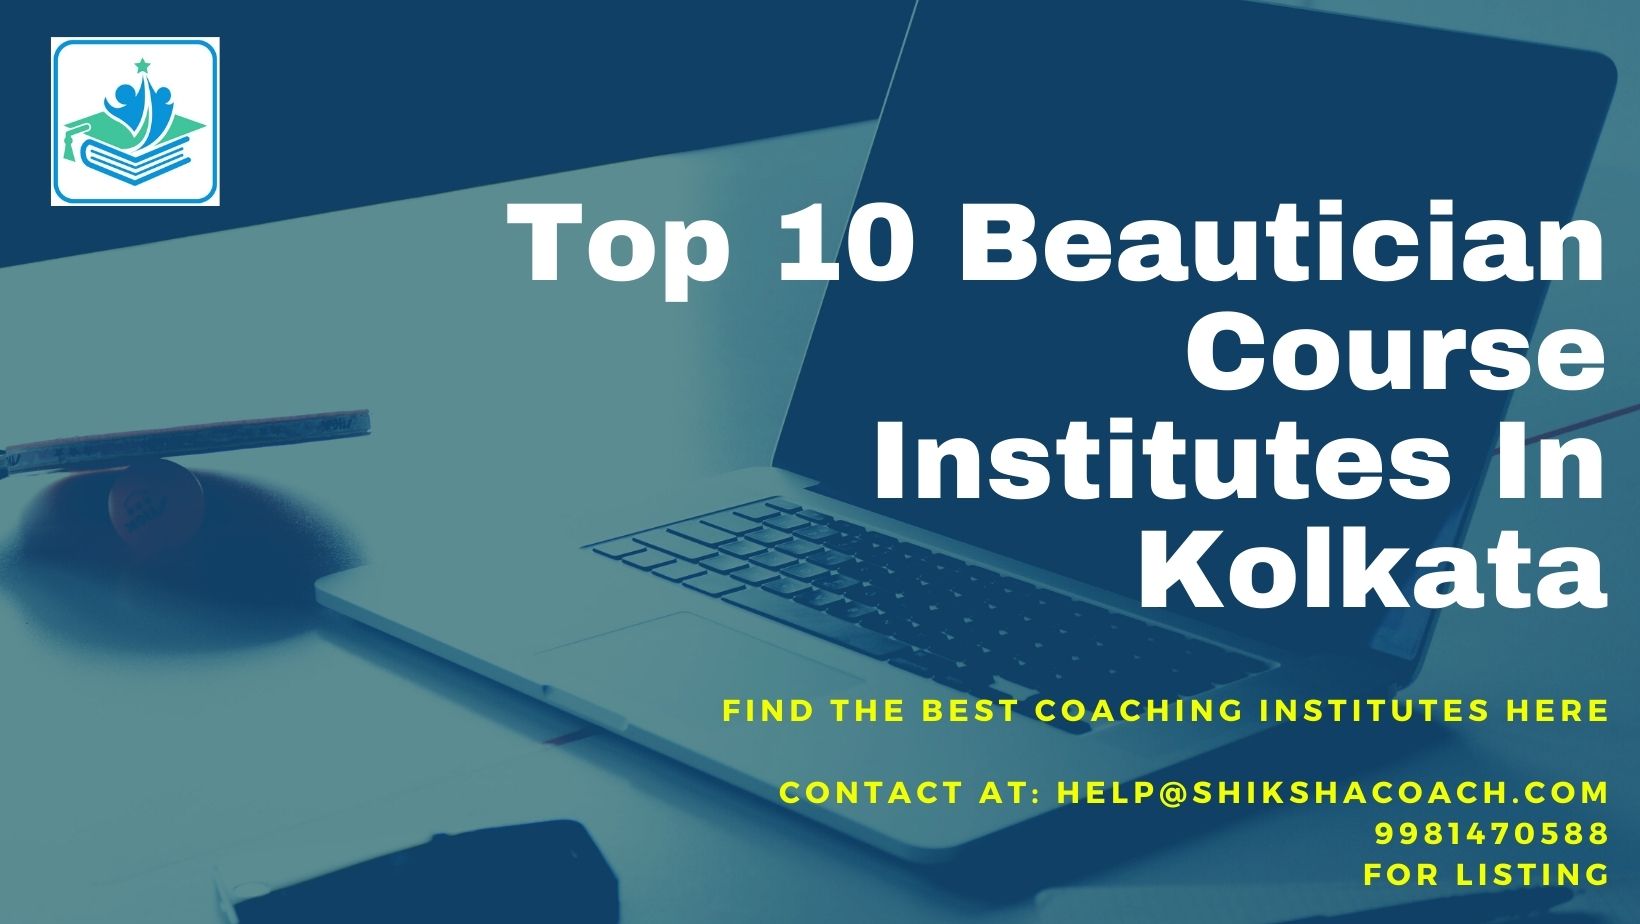 Top 10 Beautician Course Academy in Kolkata: Fees, Cont Details